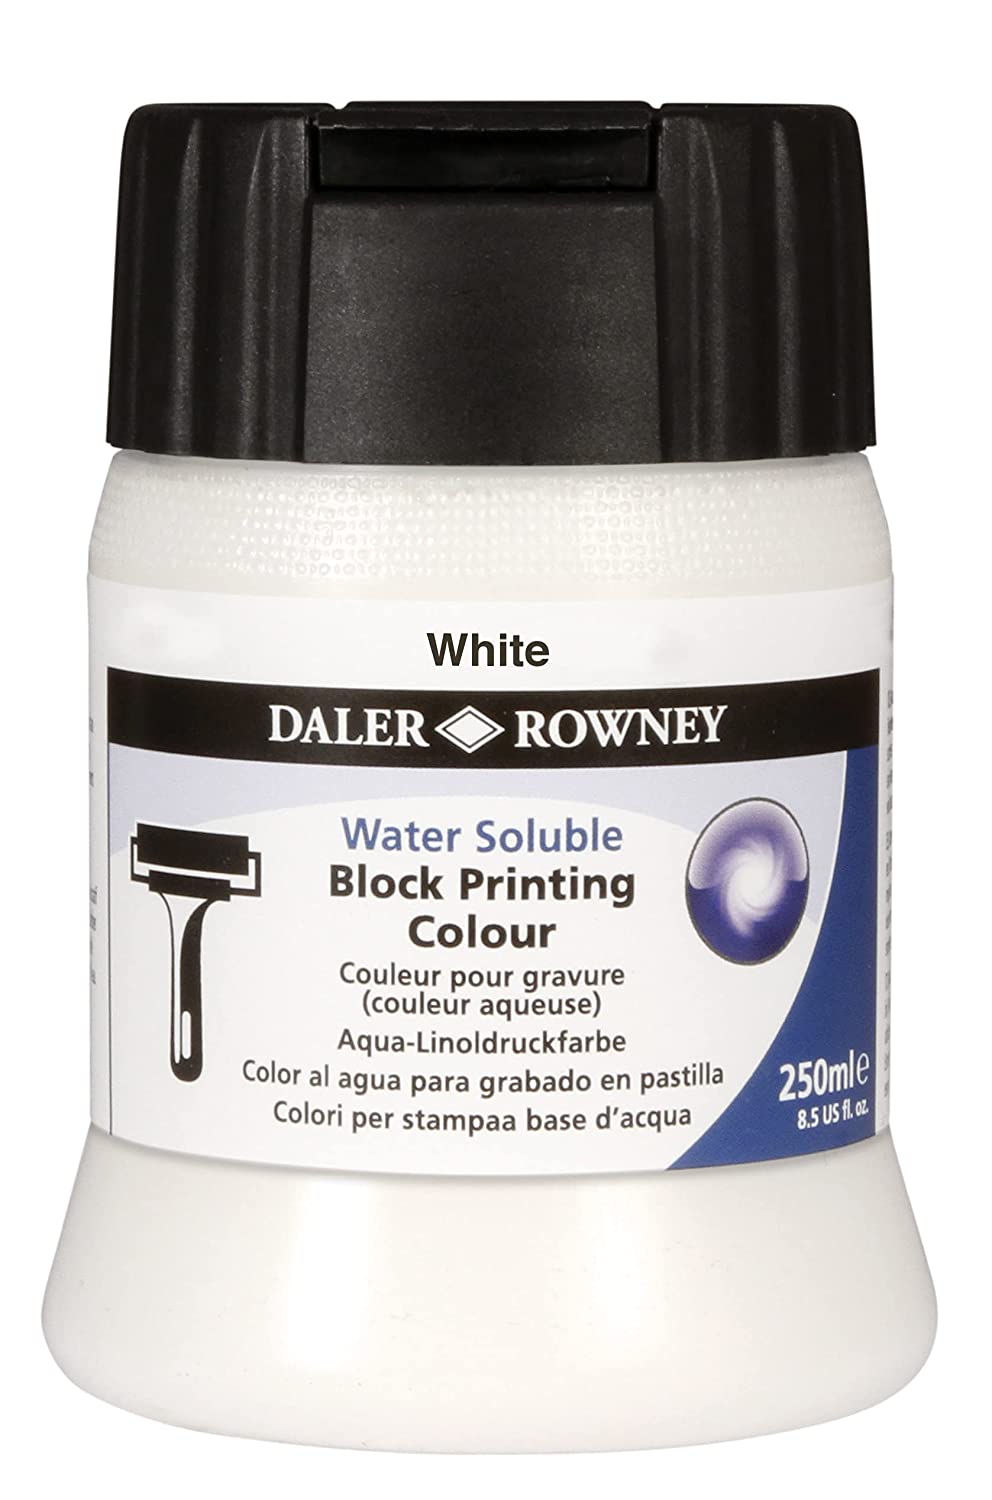 Daler-Rowney Water Soluble Block Printing Colour (250Ml- White)